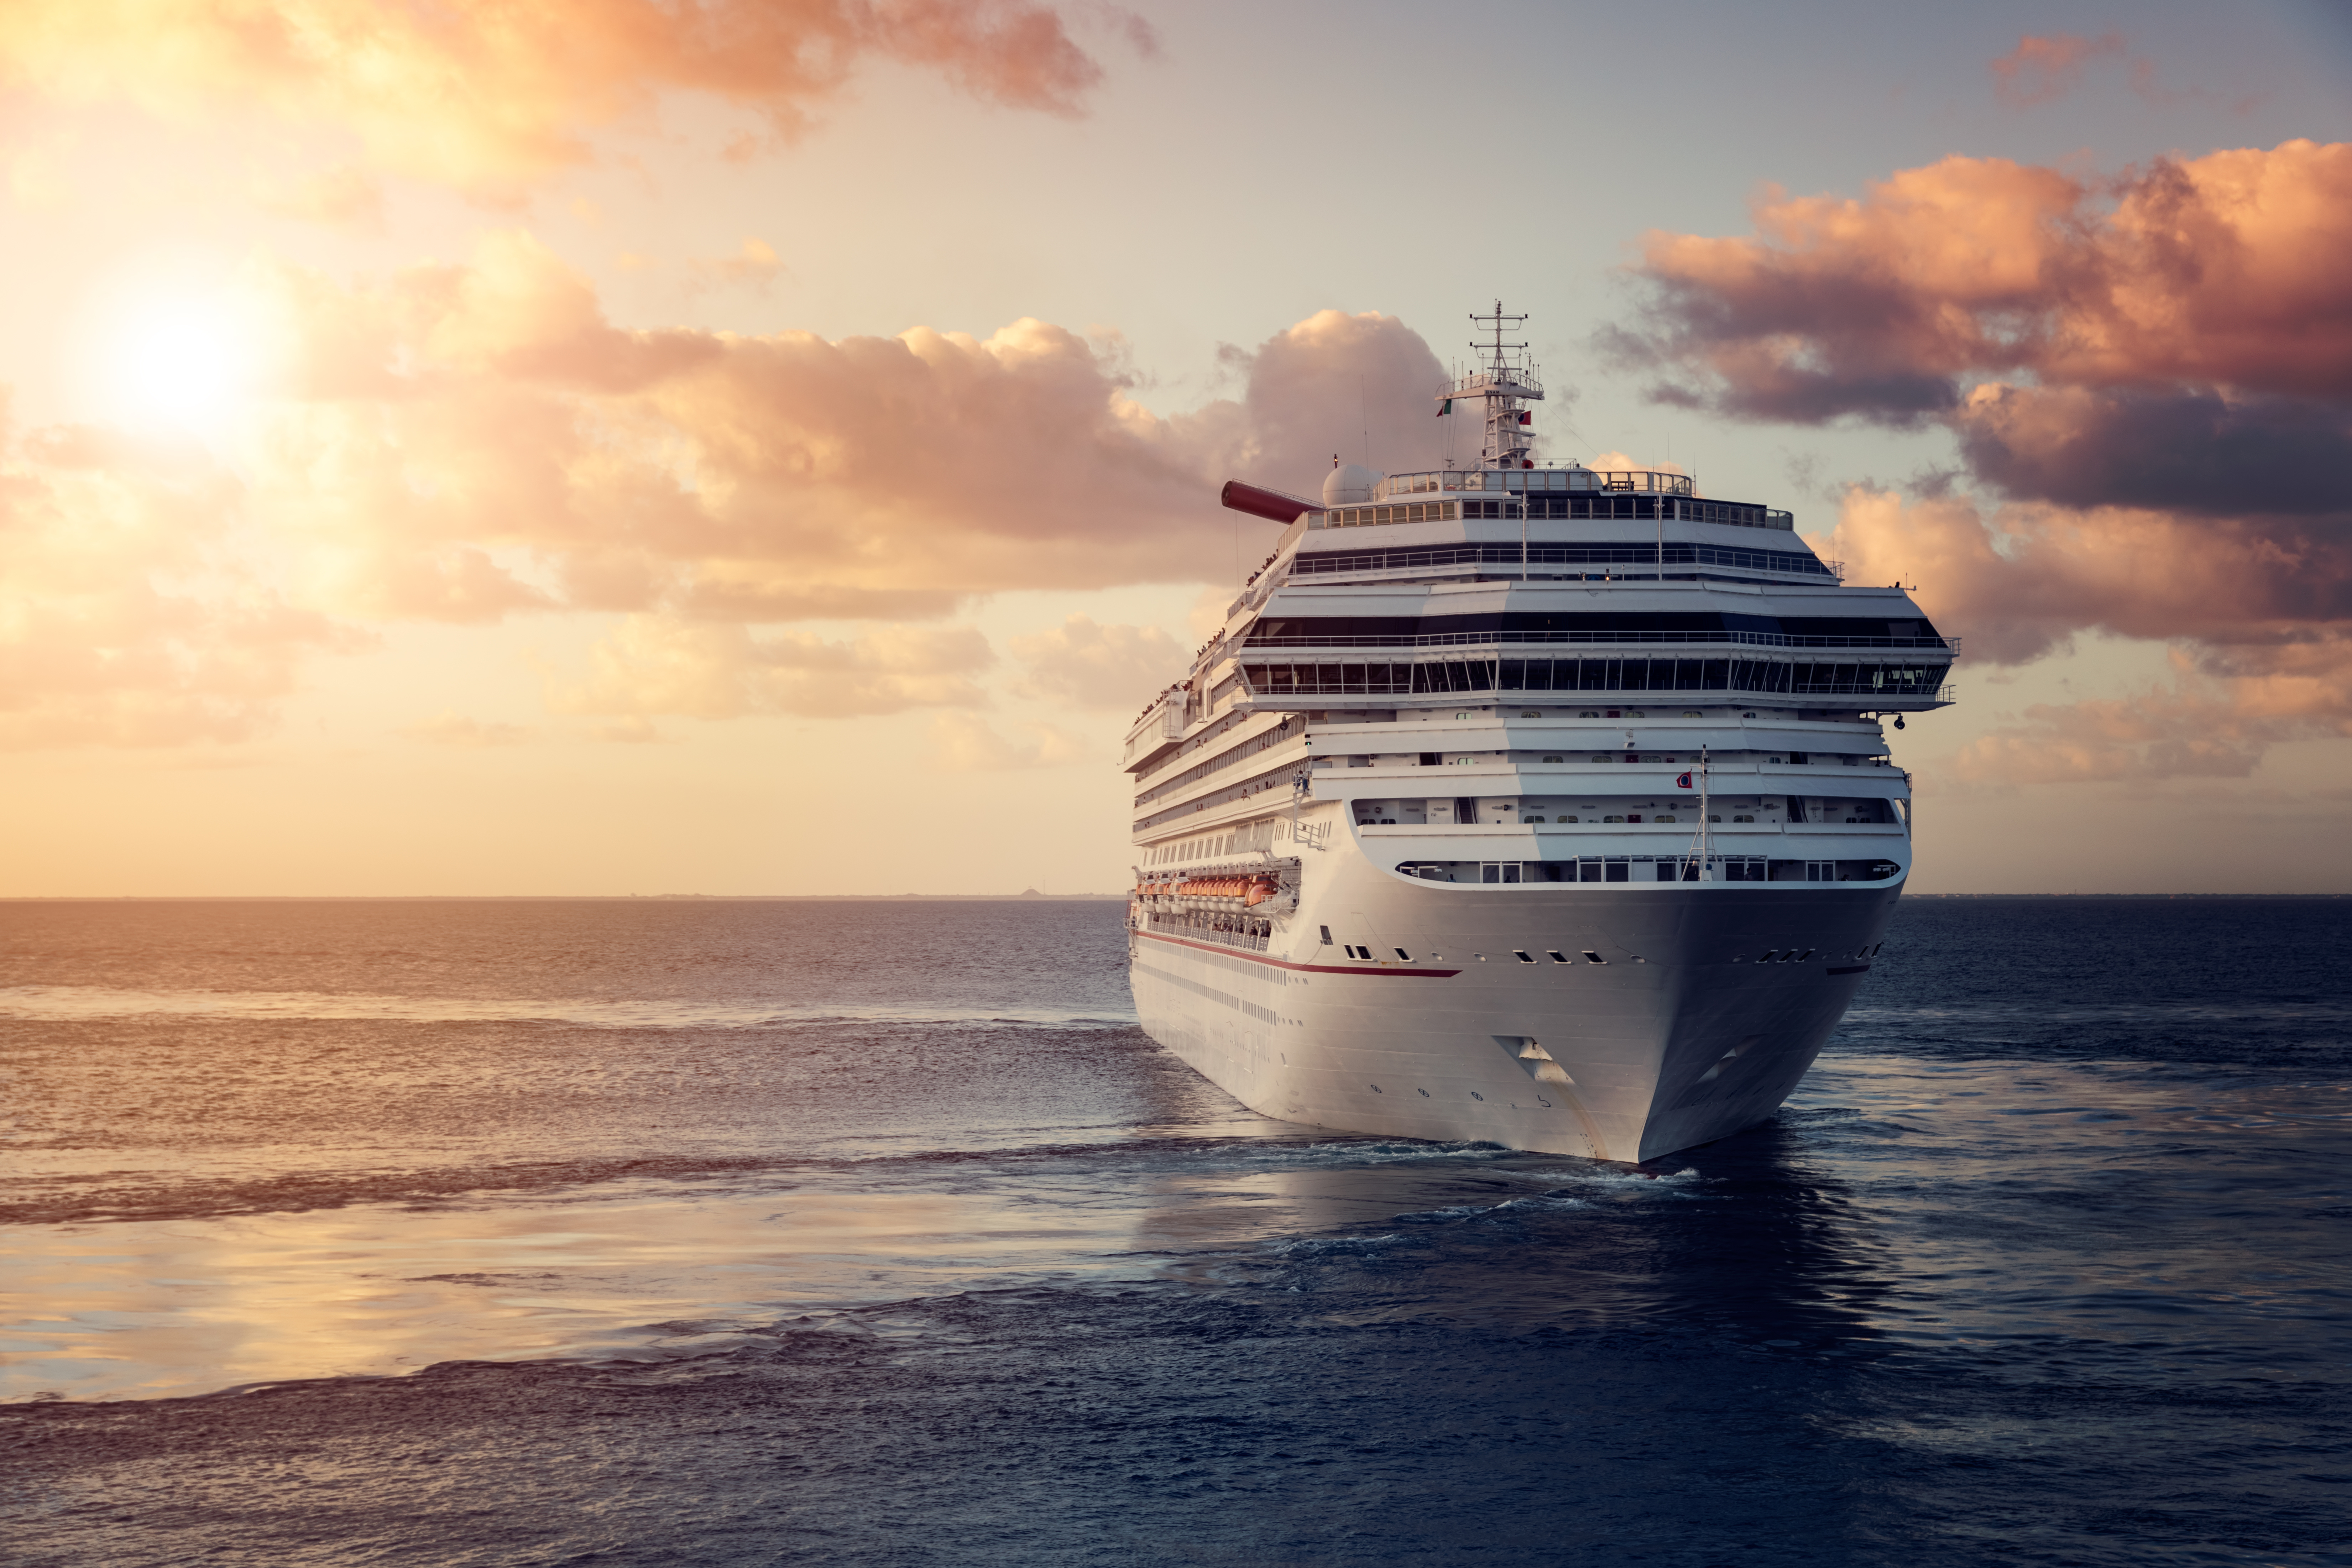 Travel Insurance for Cruises: What You Need to Know